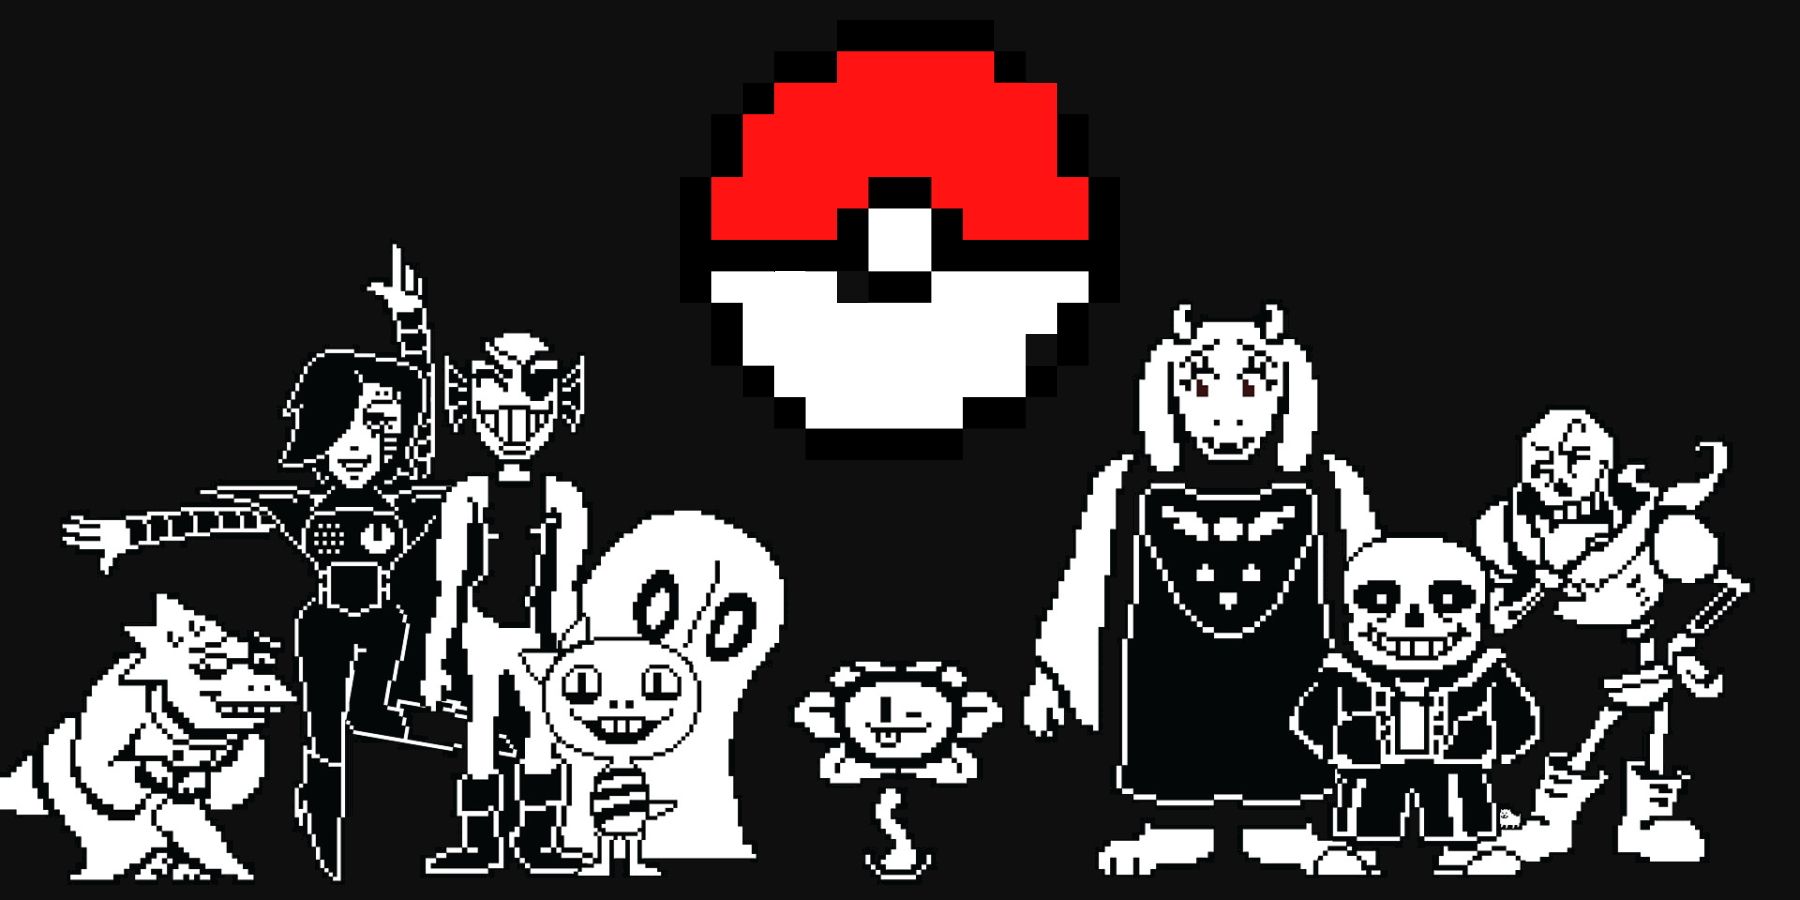 Not undertale related, but apparently Toby Fox was the composer for the new  Pokémon game : r/Undertale